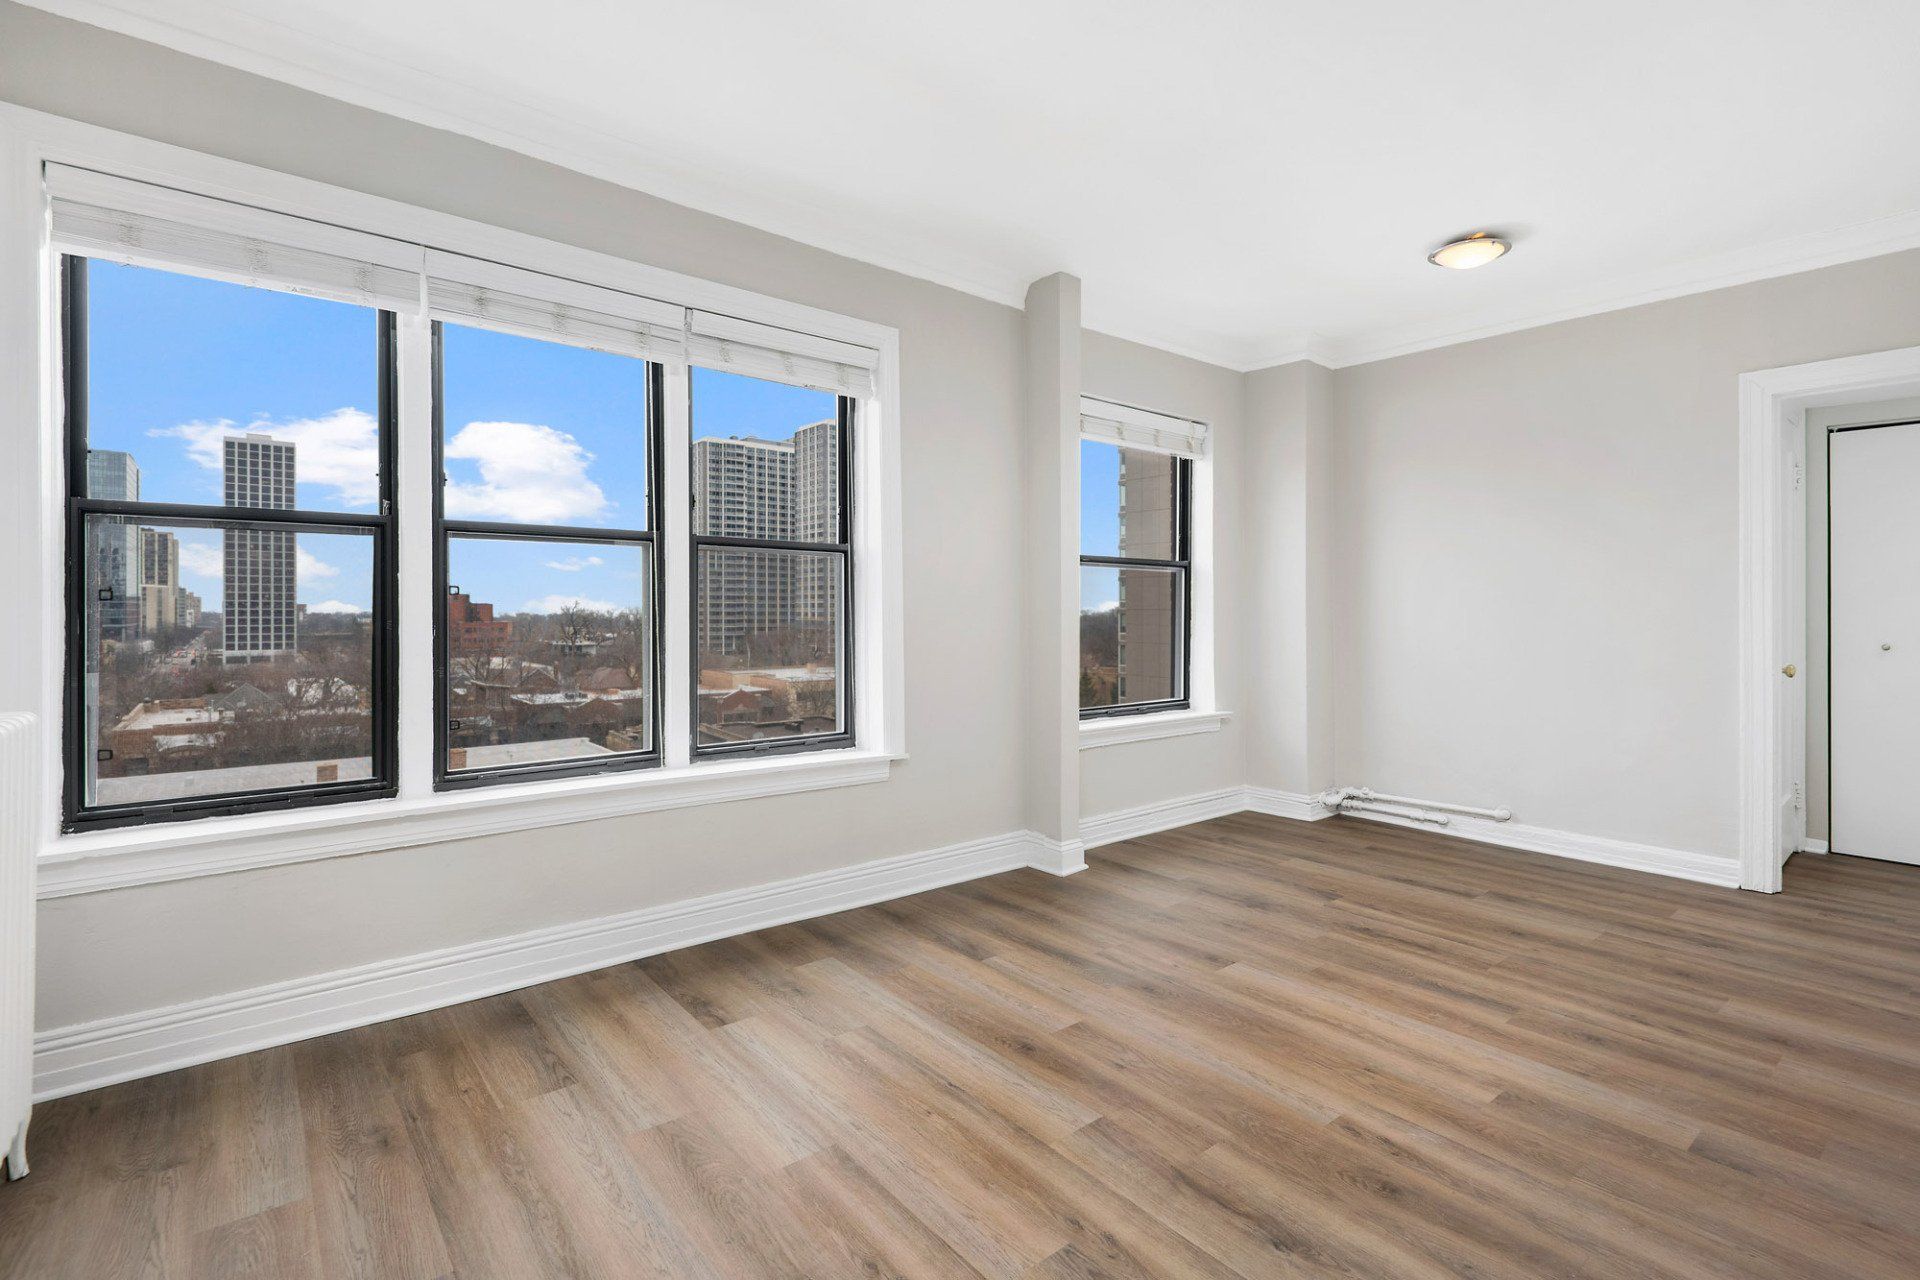 An empty living room with hardwood floors and two windows at Reside on Clarendon.